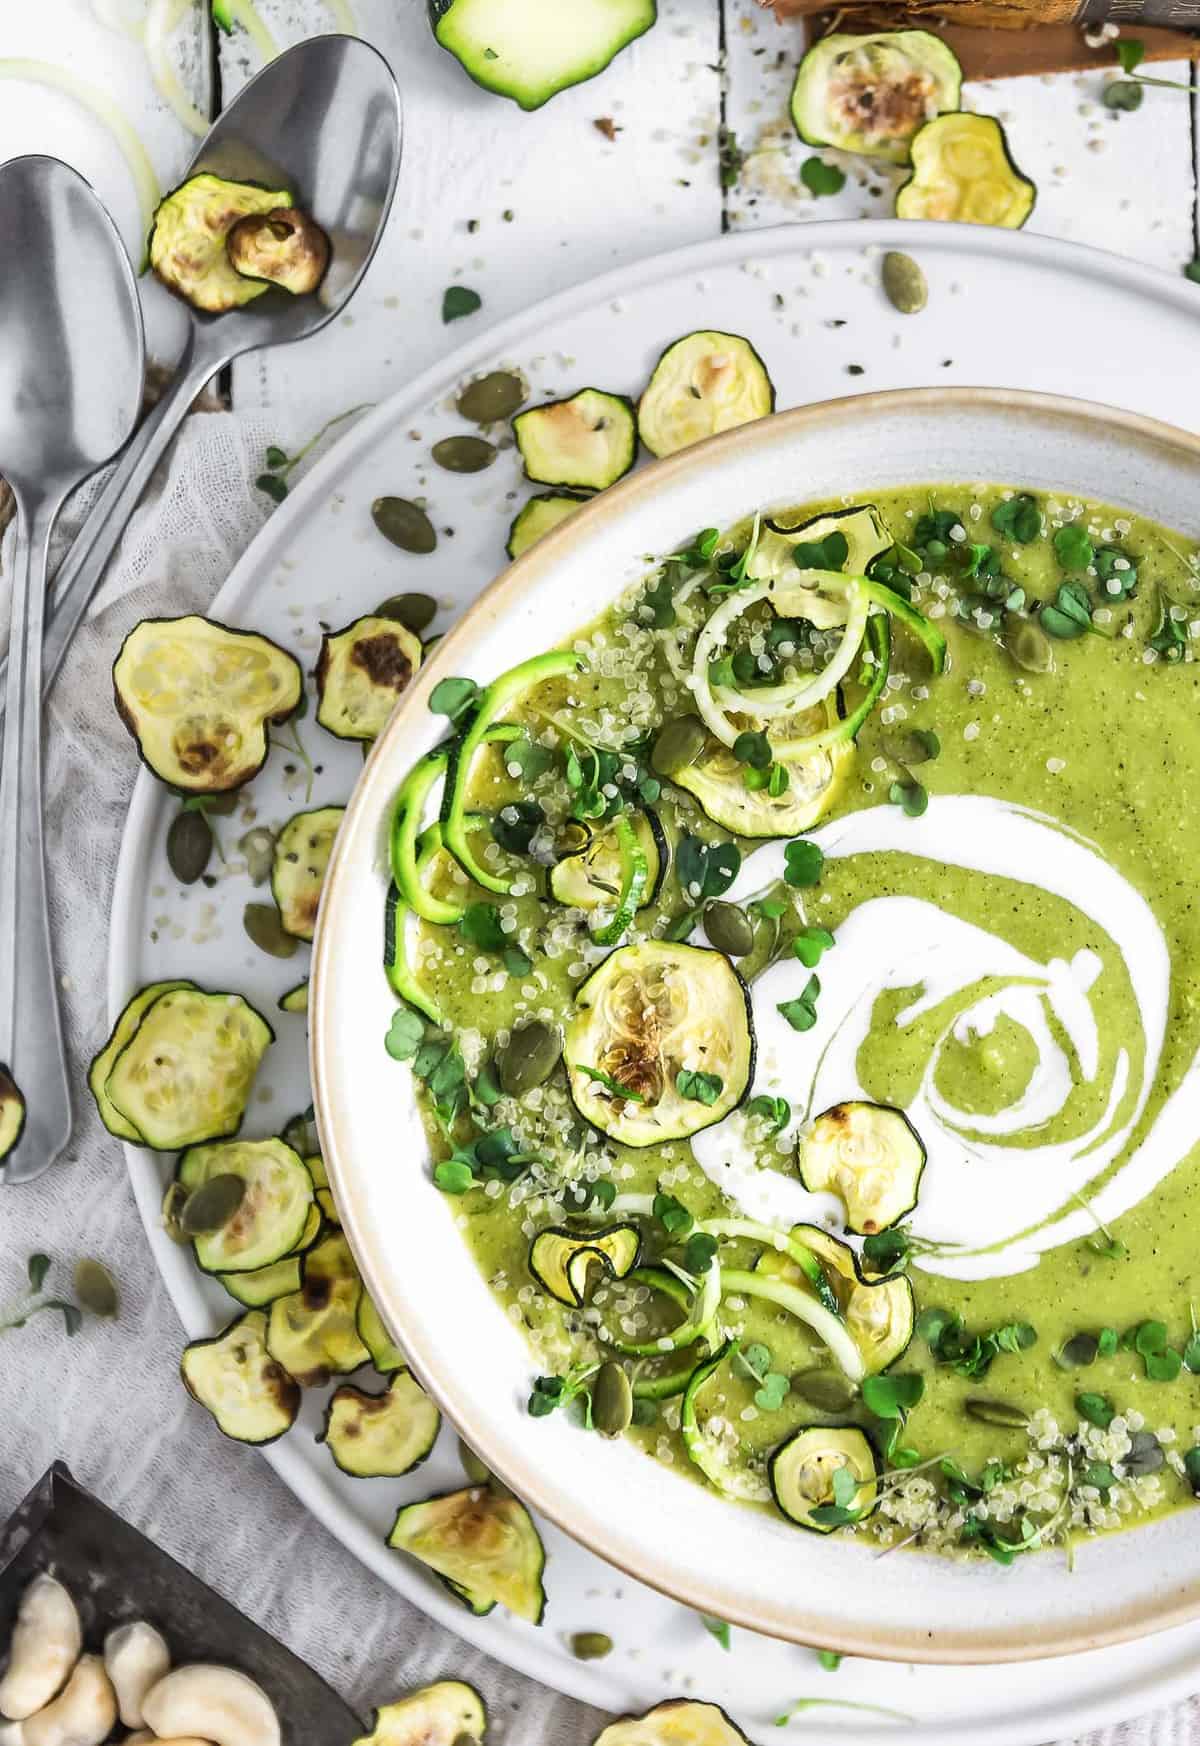 Vegan Cheesy Zucchini Soup, vegan soup, zucchini, plant based soup, plant based, vegan, vegetarian, whole food plant based, gluten free, recipe, wfpb, healthy, healthy vegan, oil free, no refined sugar, no oil, refined sugar free, dairy free, dinner party, entertaining, dinner, lunch, zucchini soup, soup, fast recipe, easy recipe, quick recipe, 30 minute meal,